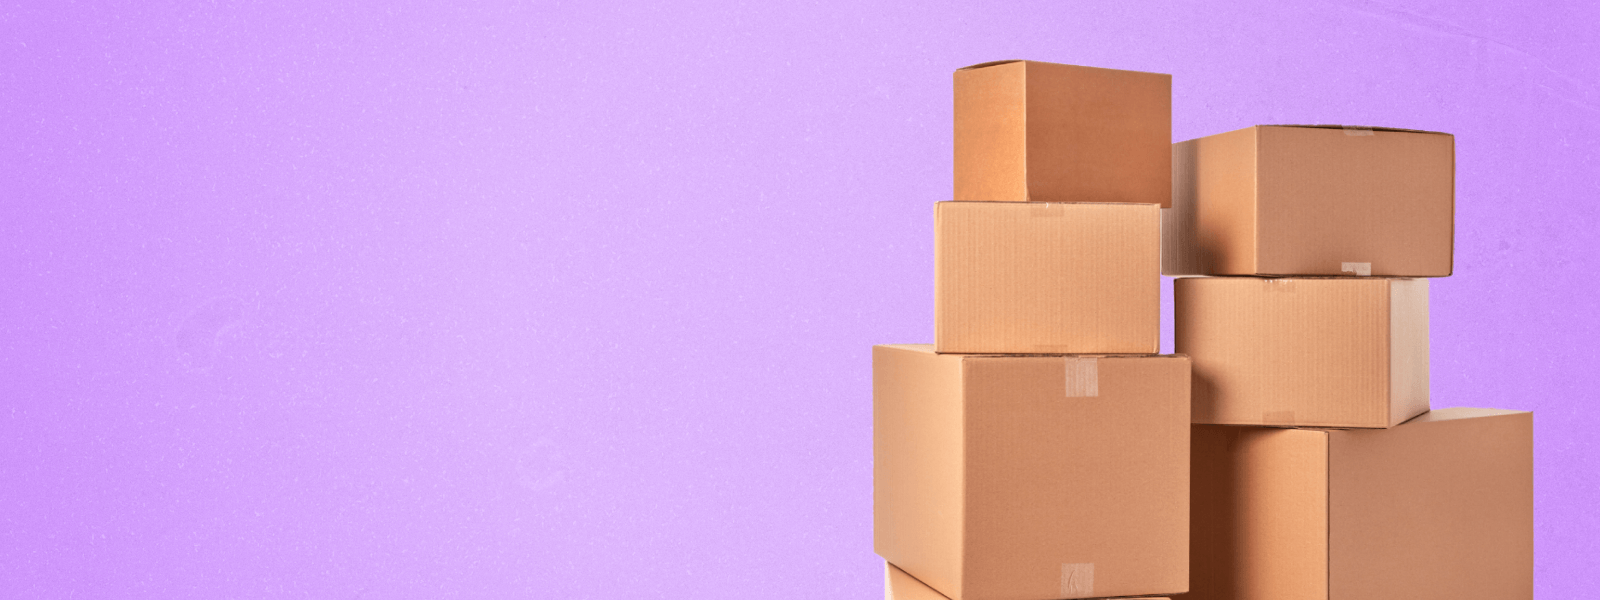 cardboard boxes on purple background